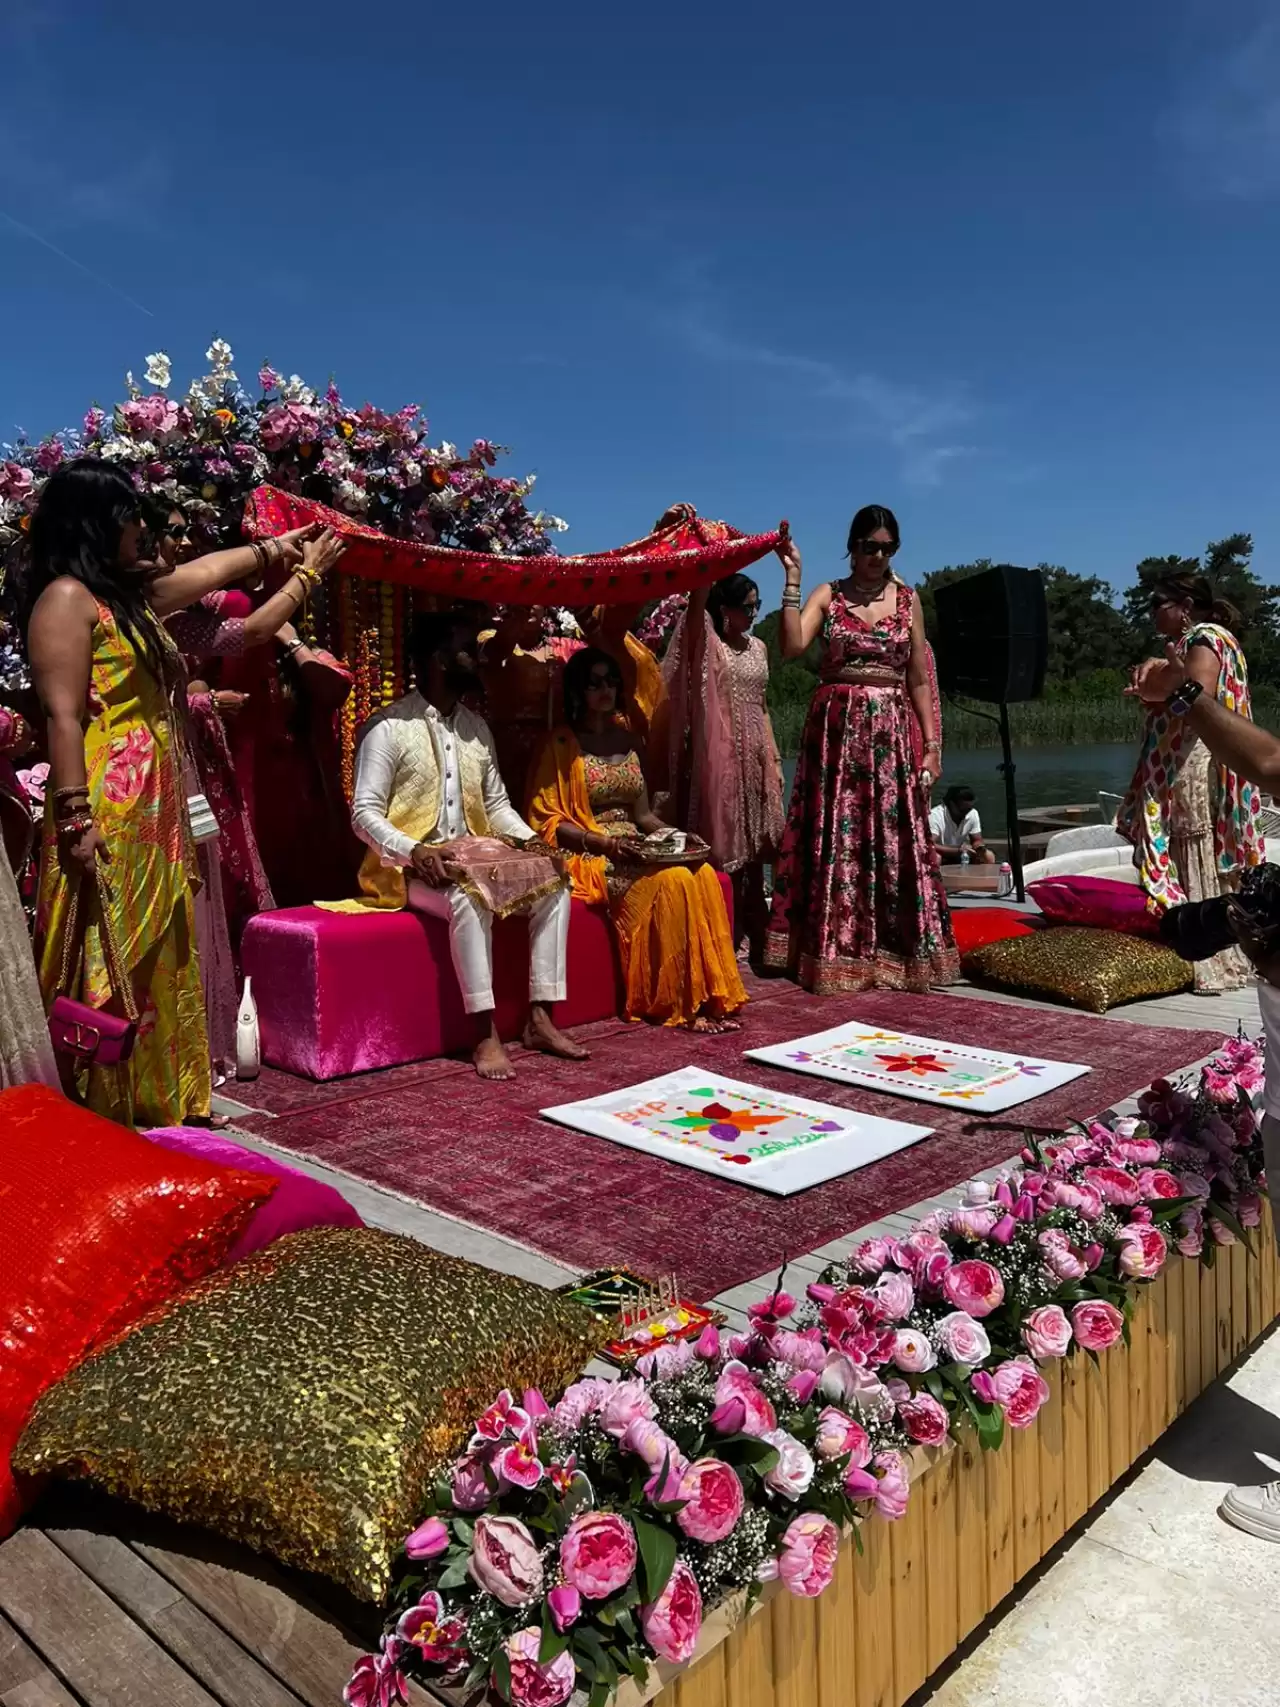 UK Tour Operator Caria Holidays Hosted an Unforgettable Indian Wedding in Antalya